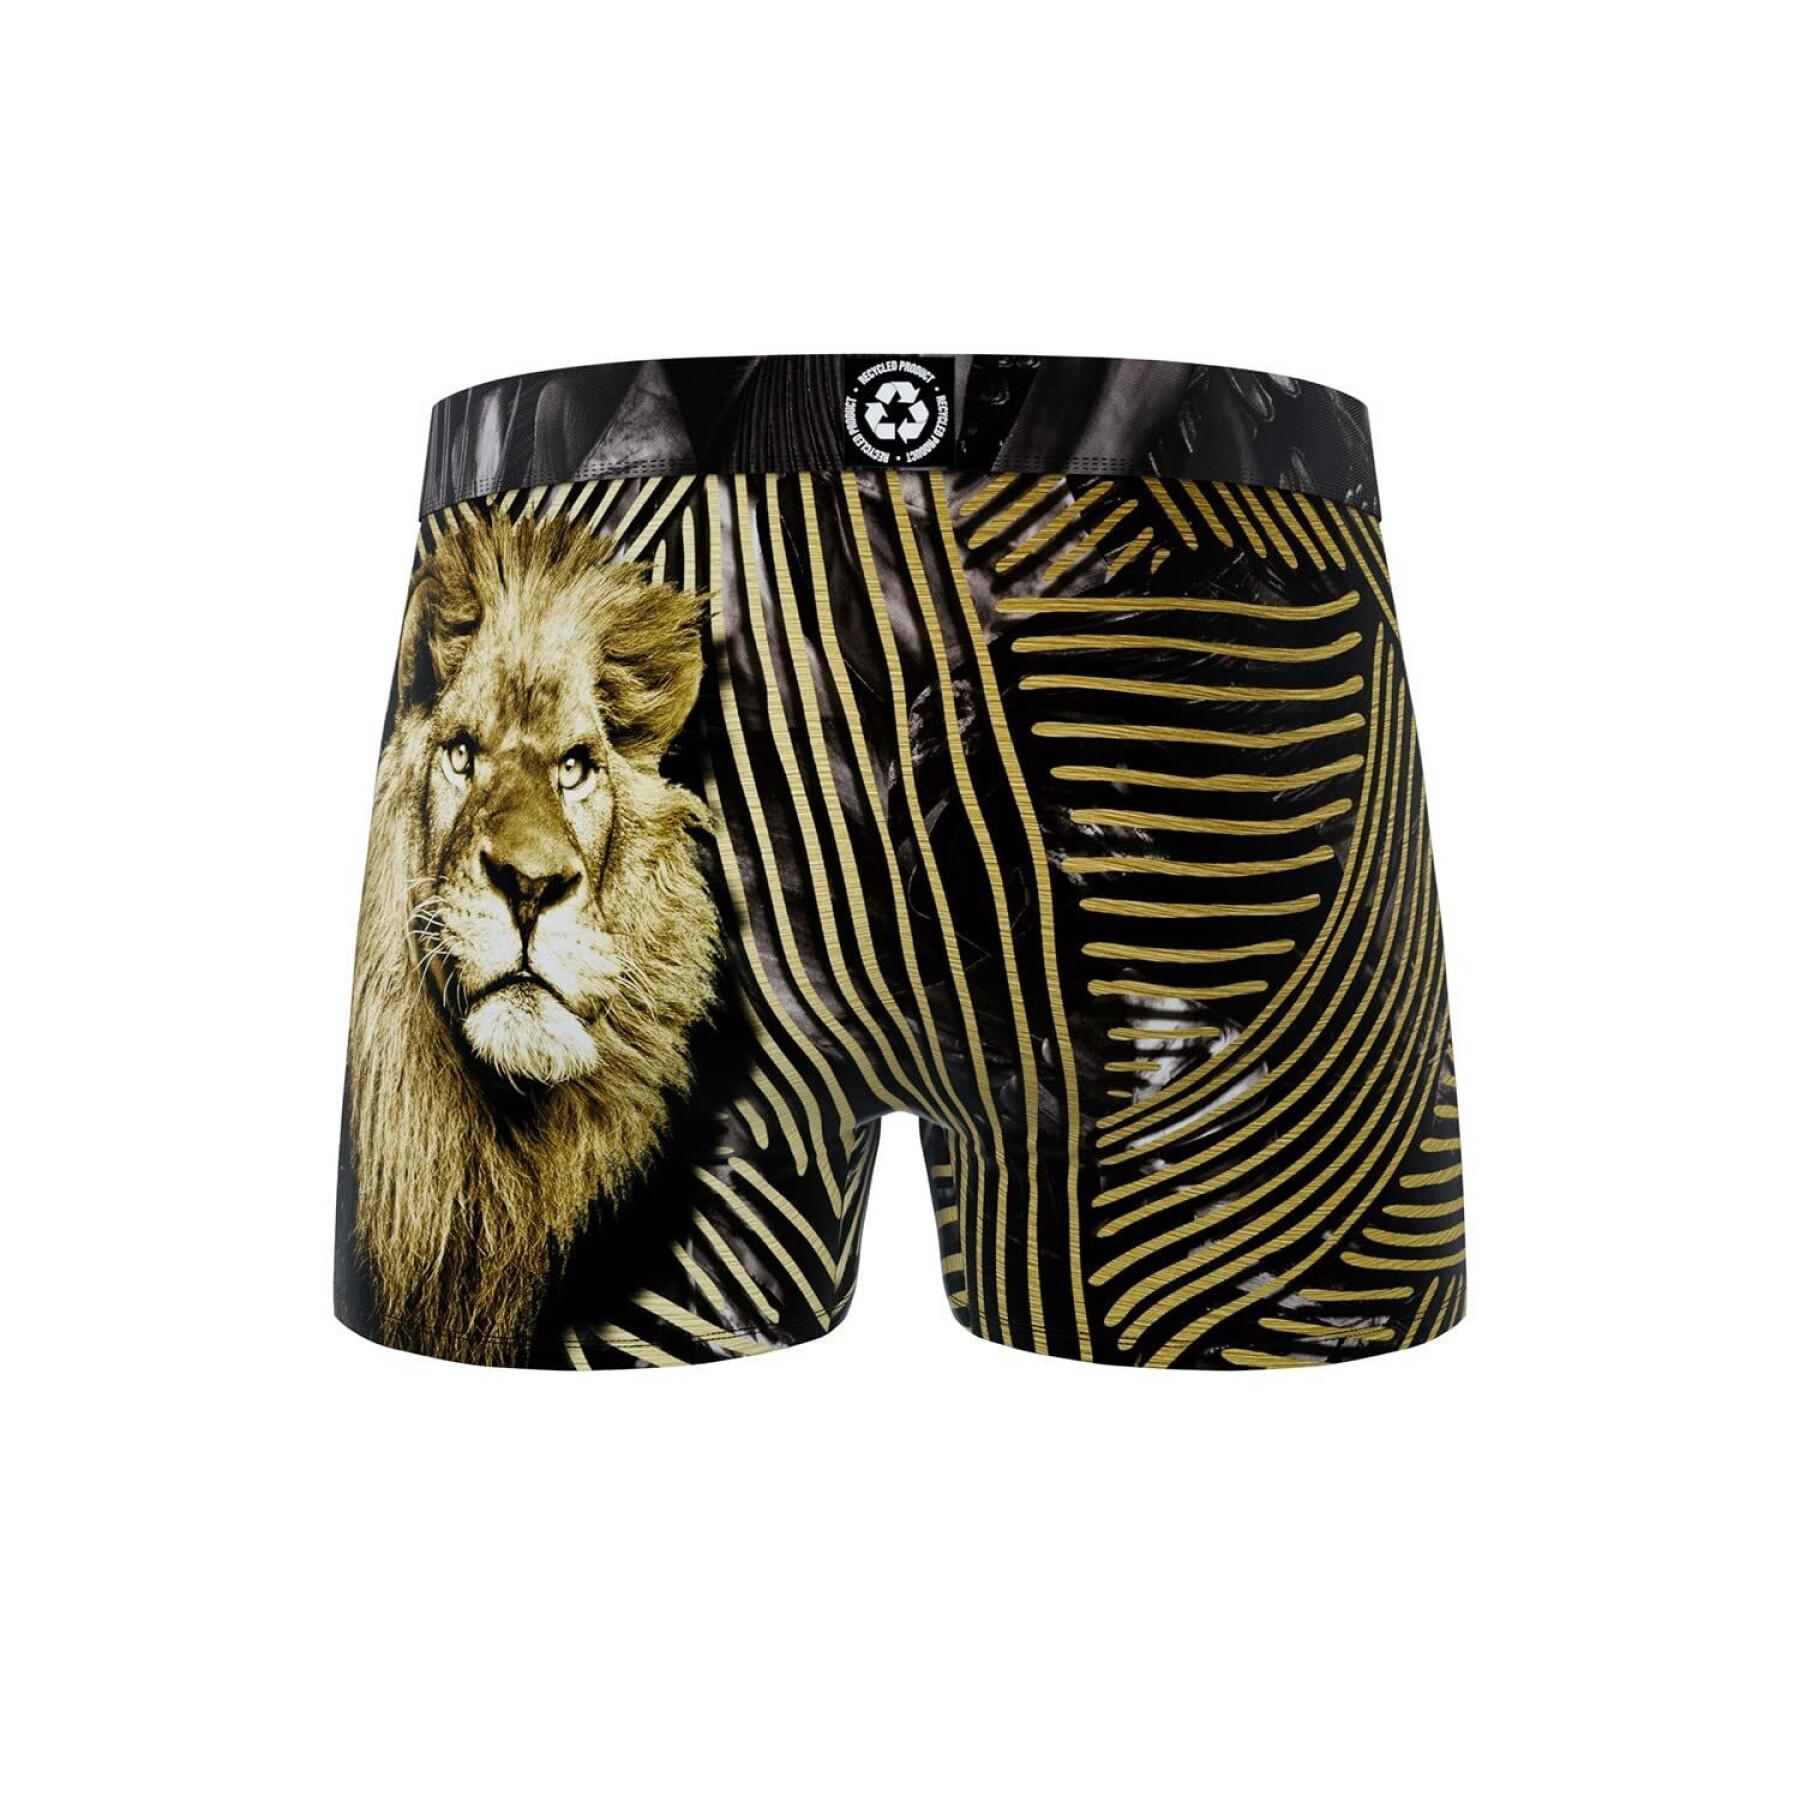 Recycled polyester boxer shorts with lion print for kids Freegun